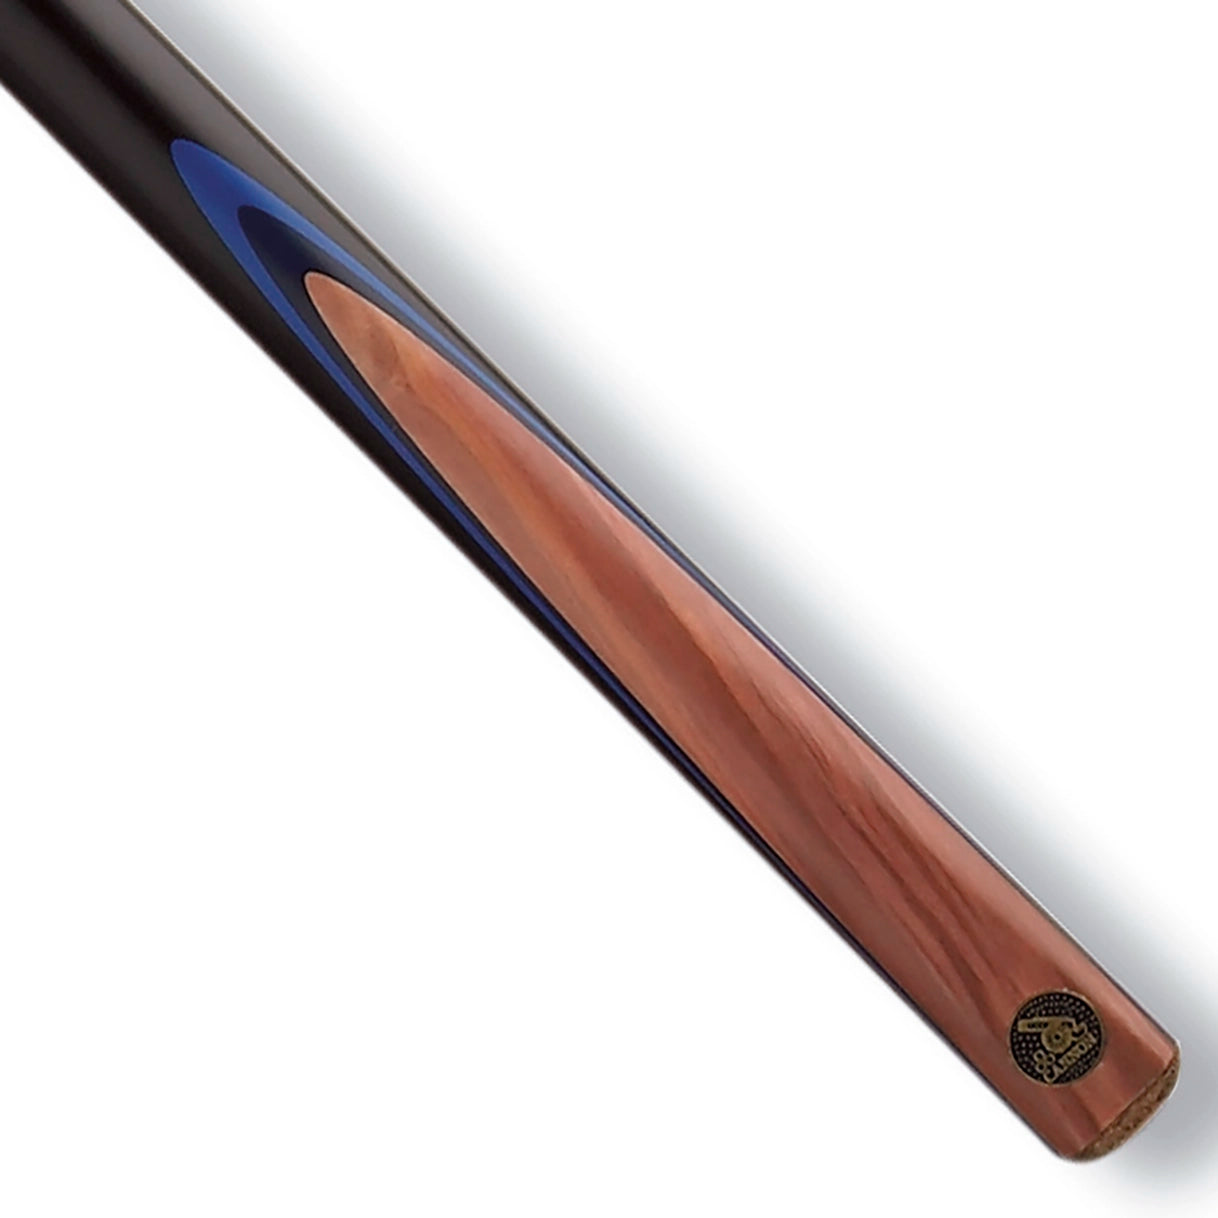 Cannon Sapphire 3/4 Jointed Snooker Cue. Butt view